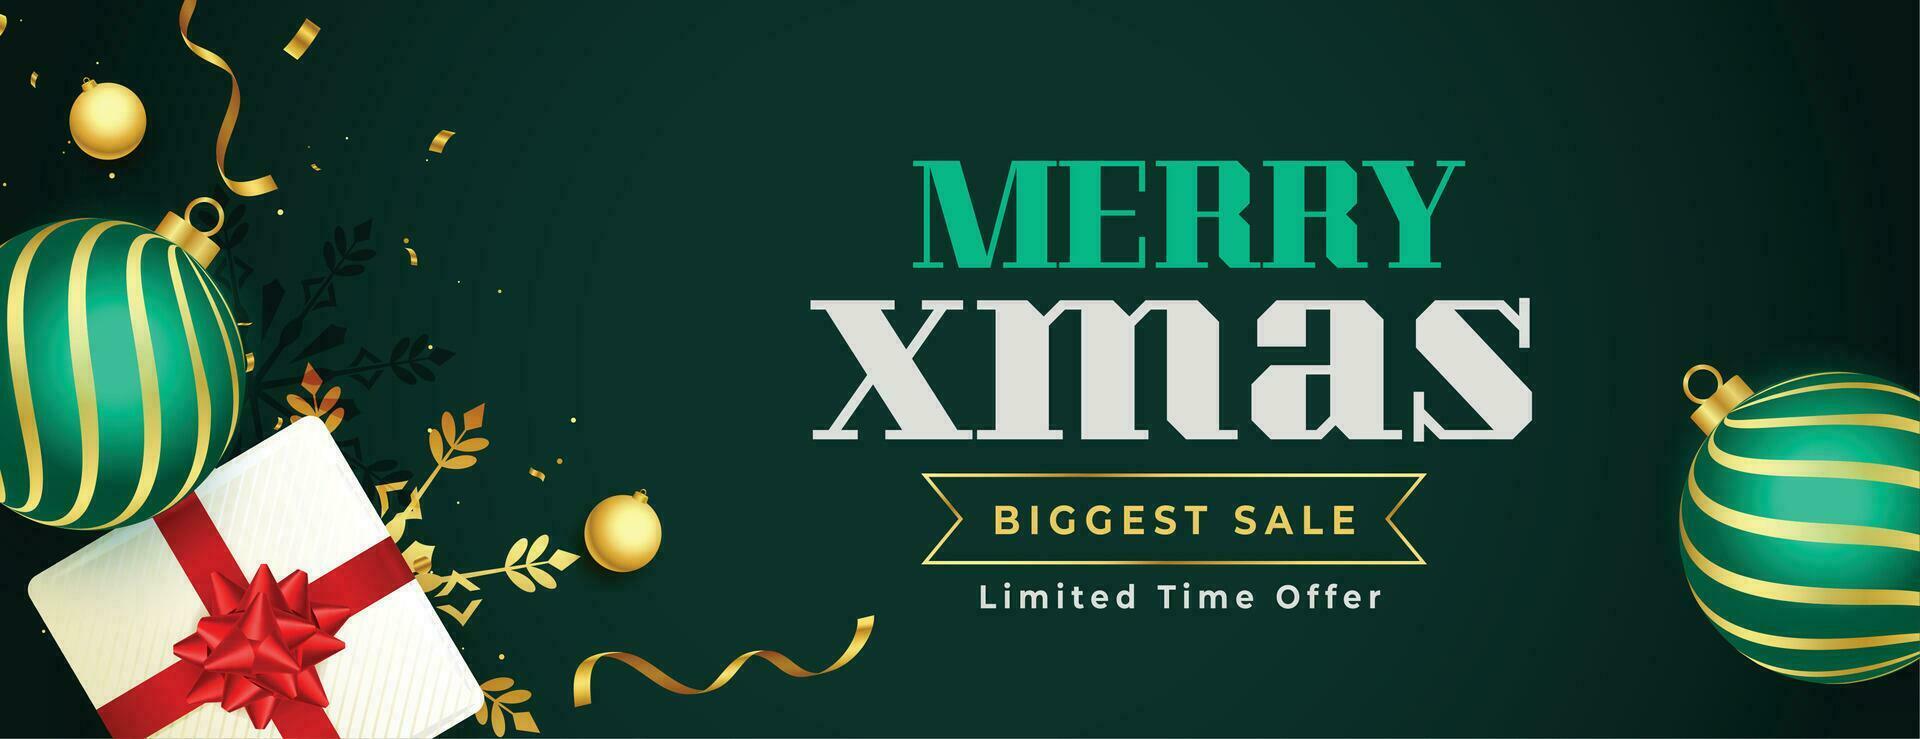 merry christmas sale banner with realistic gift boxes and balls decoration vector